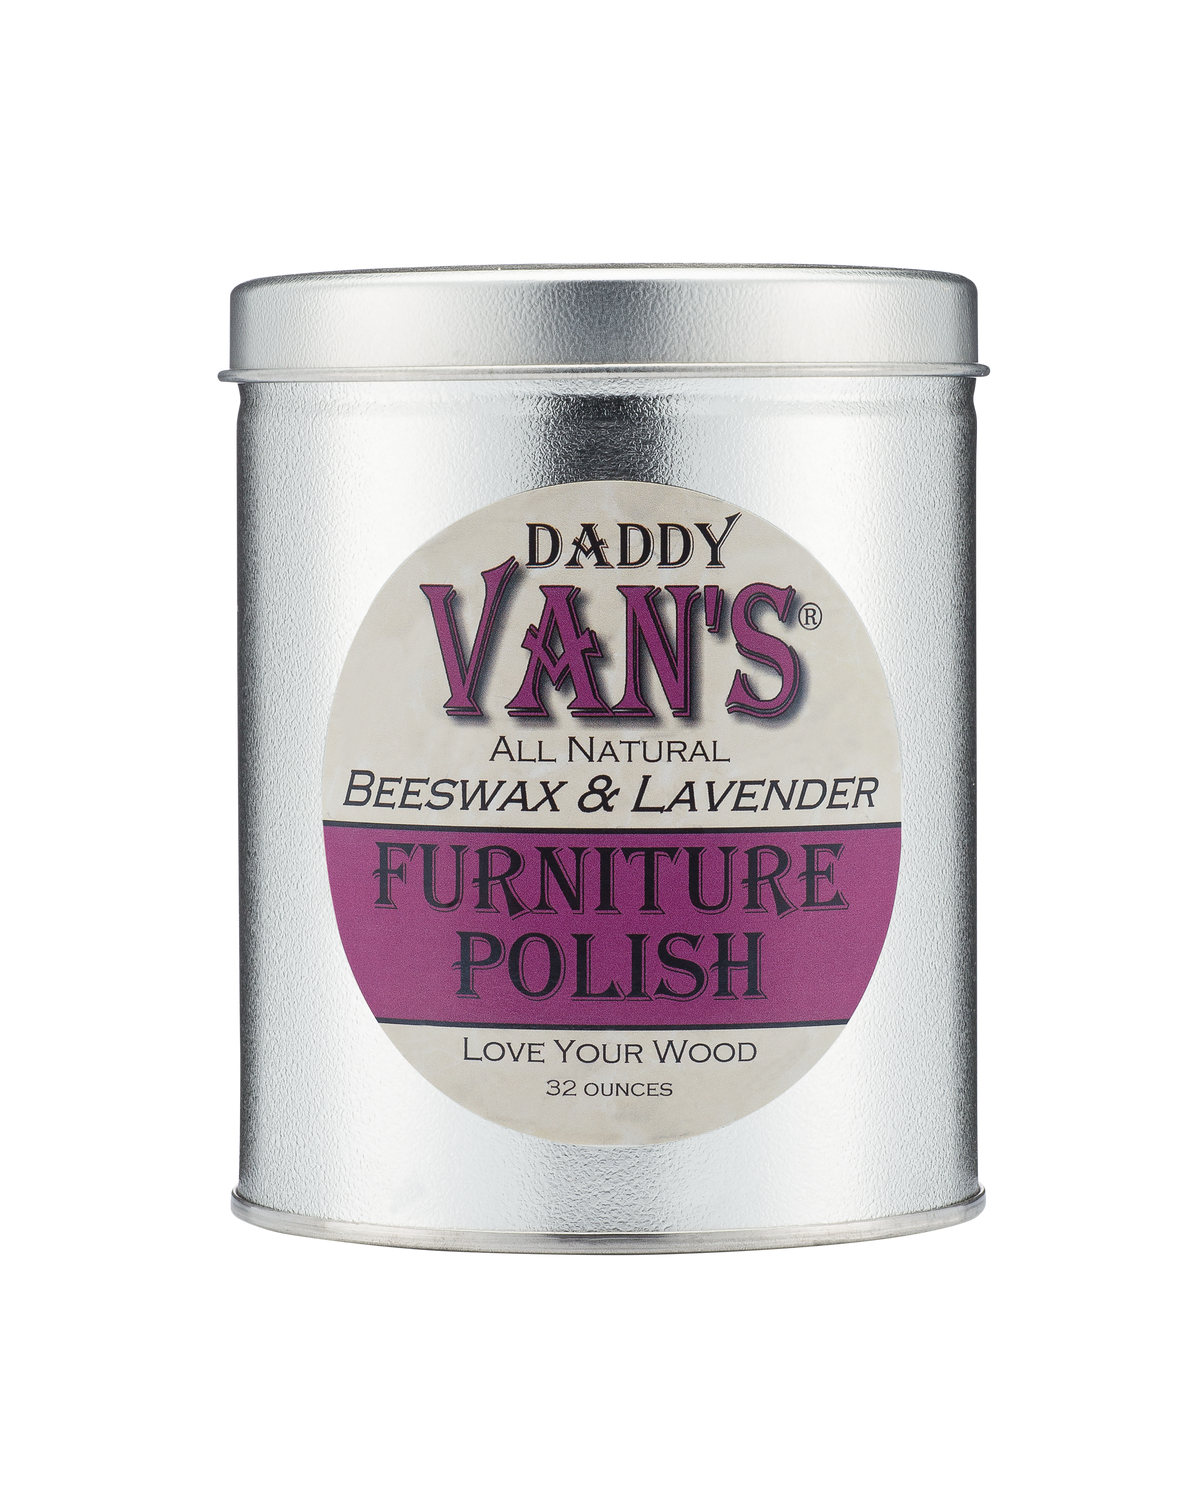 Daddy Van's All Natural Beeswax & Lavender Furniture Polish - Big Daddy 32 Ounces